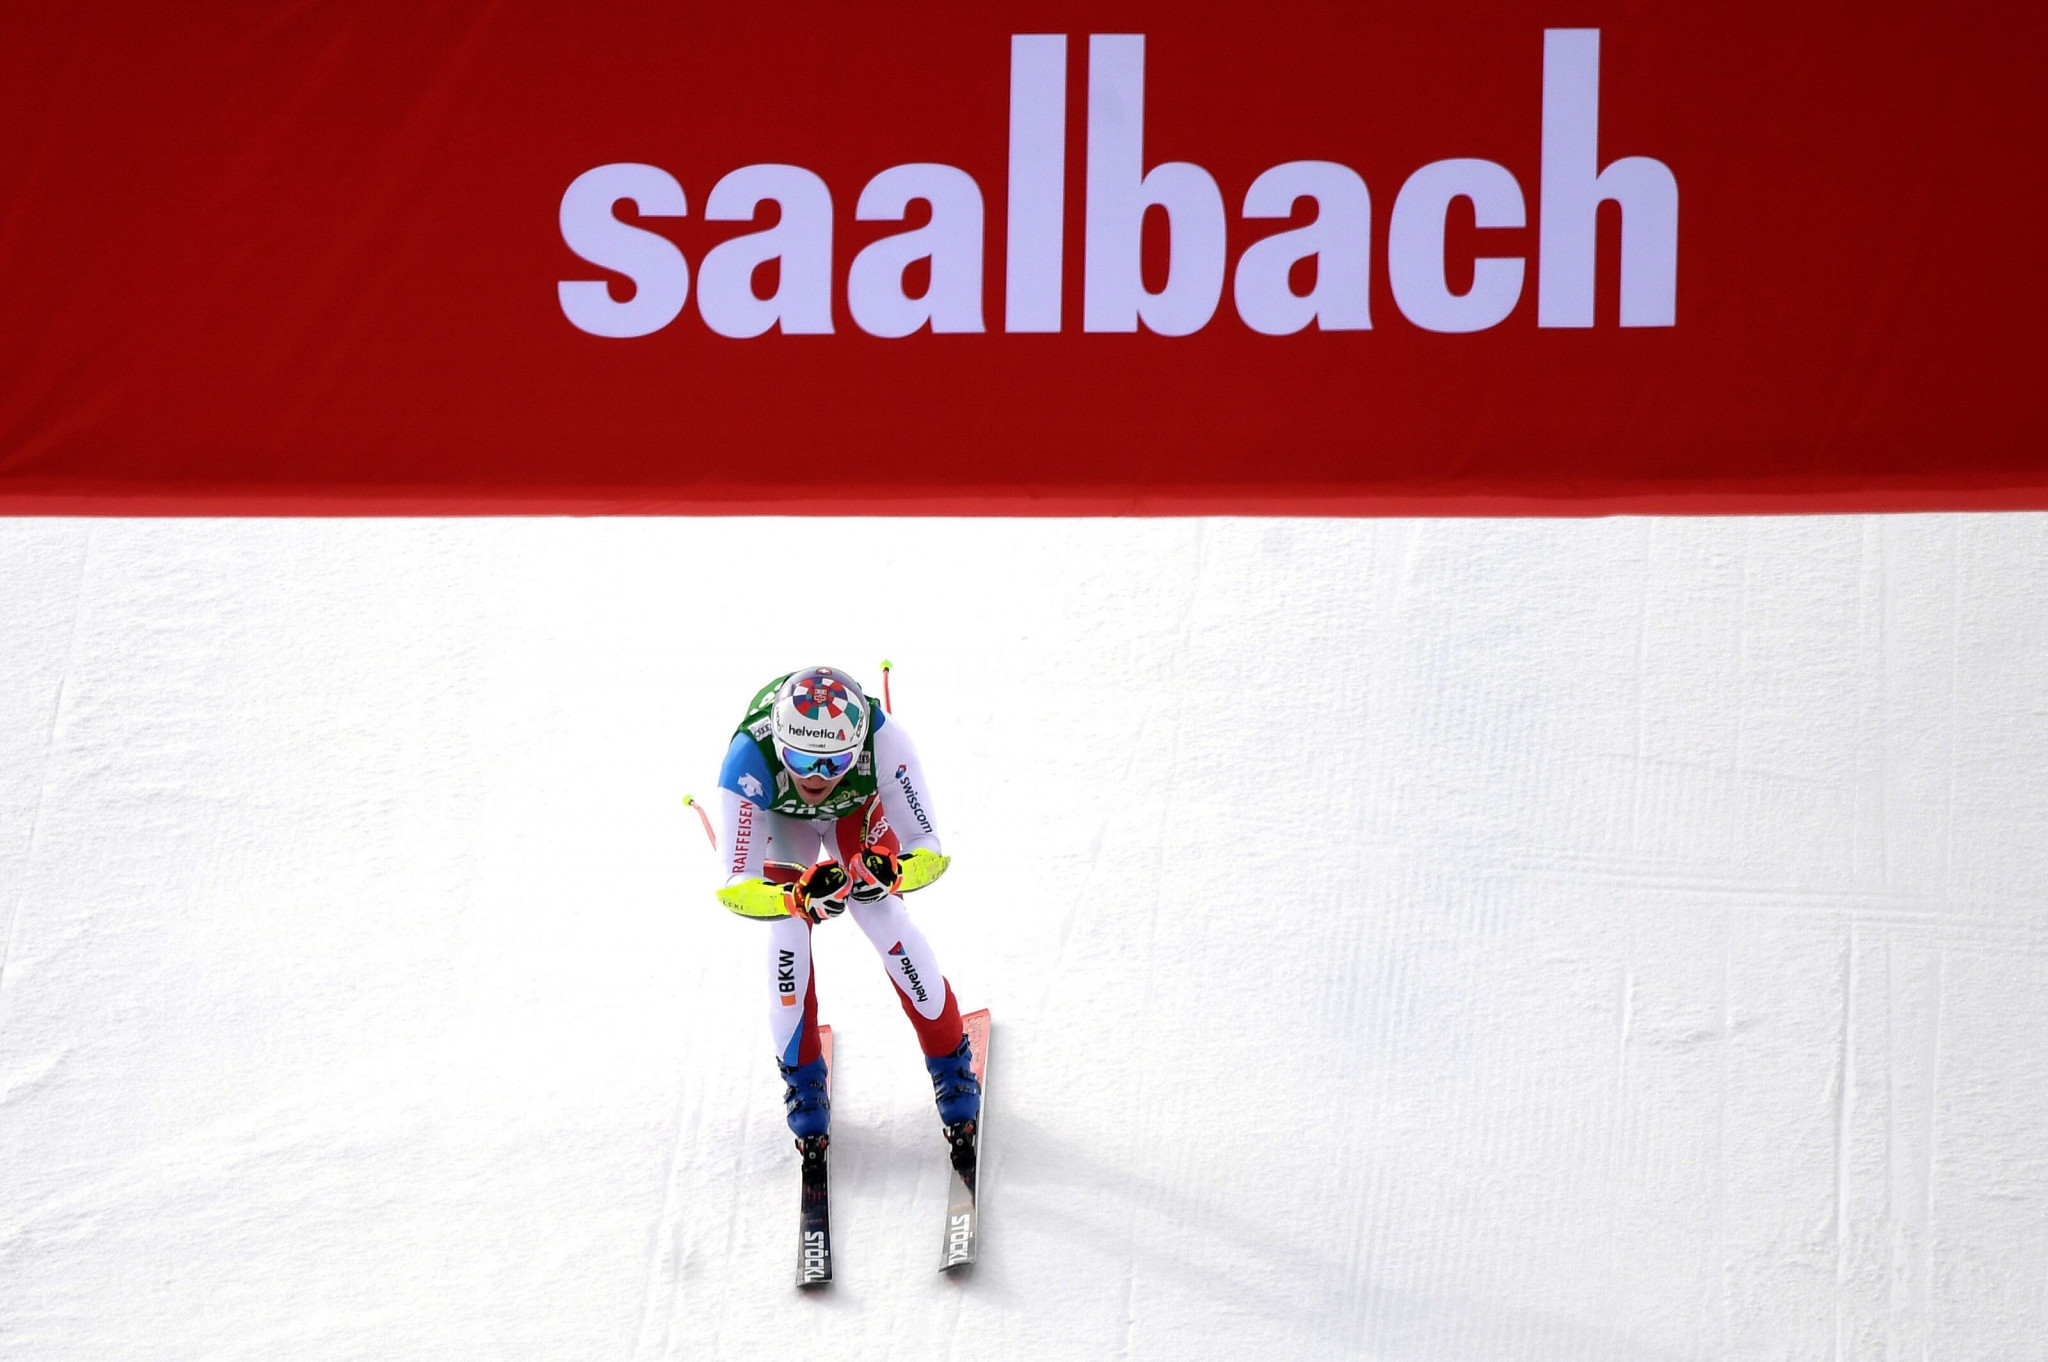 Saalbach is set to stage the 2025 Alpine World Ski Championships ©Getty Images